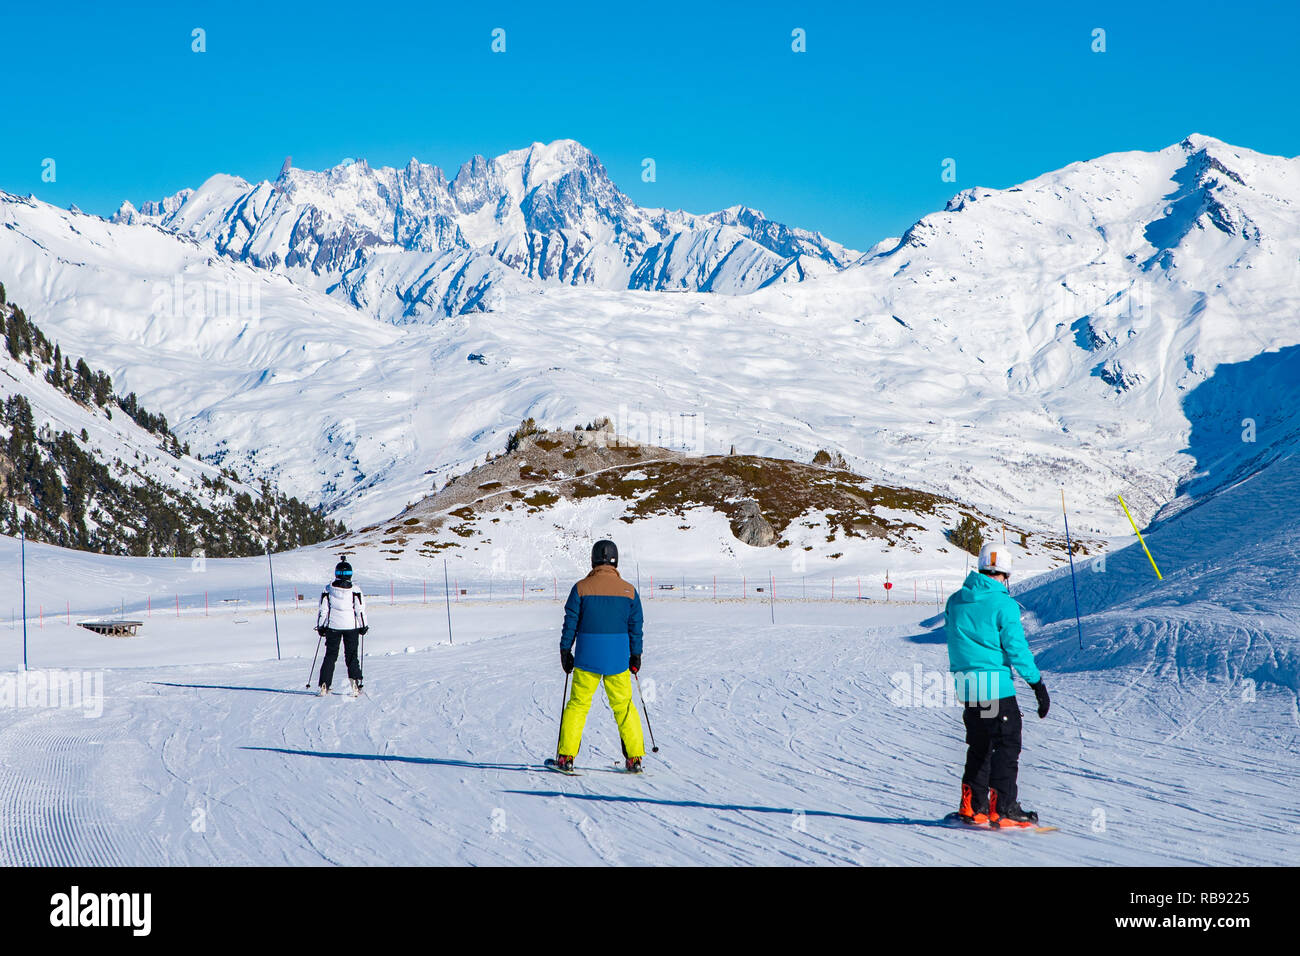 People enjoy ski and snowboard for winter holiday in Alps area with Mont Blanc as background, Les Arcs 2000, Savoie, France, Europe Stock Photo